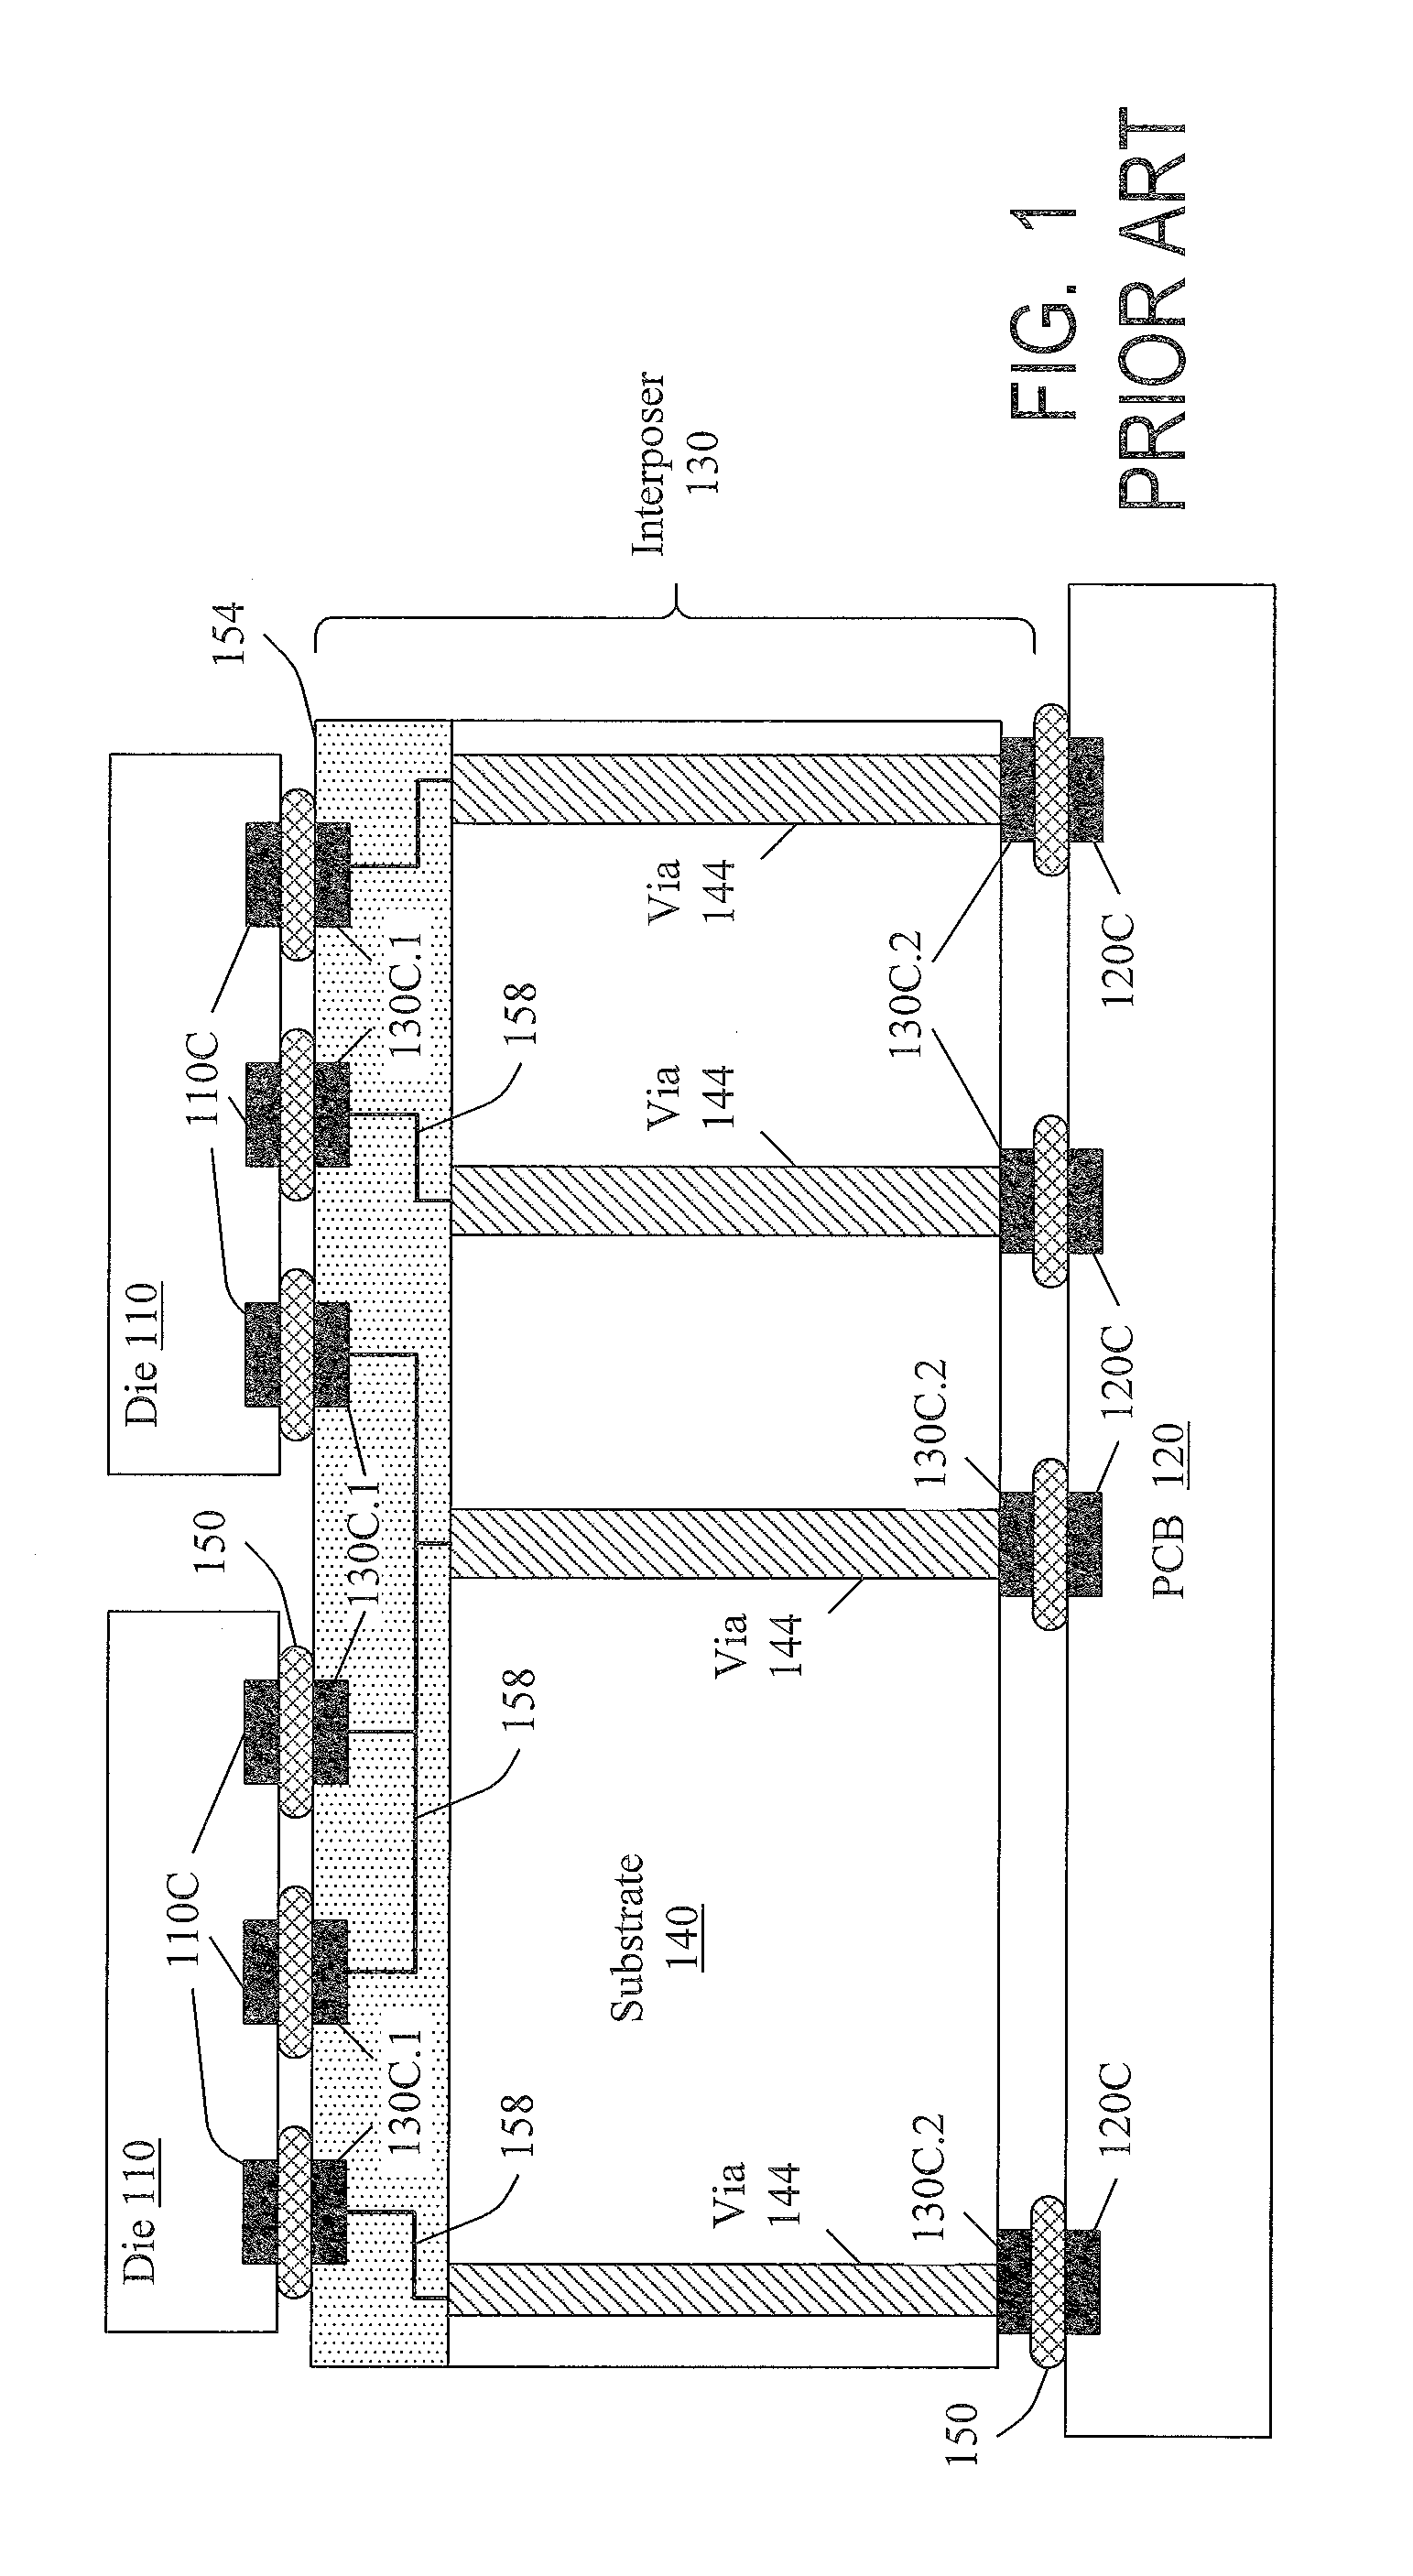 Substrates with through vias with conductive features for connection to integrated circuit elements, and methods for forming through vias in substrates